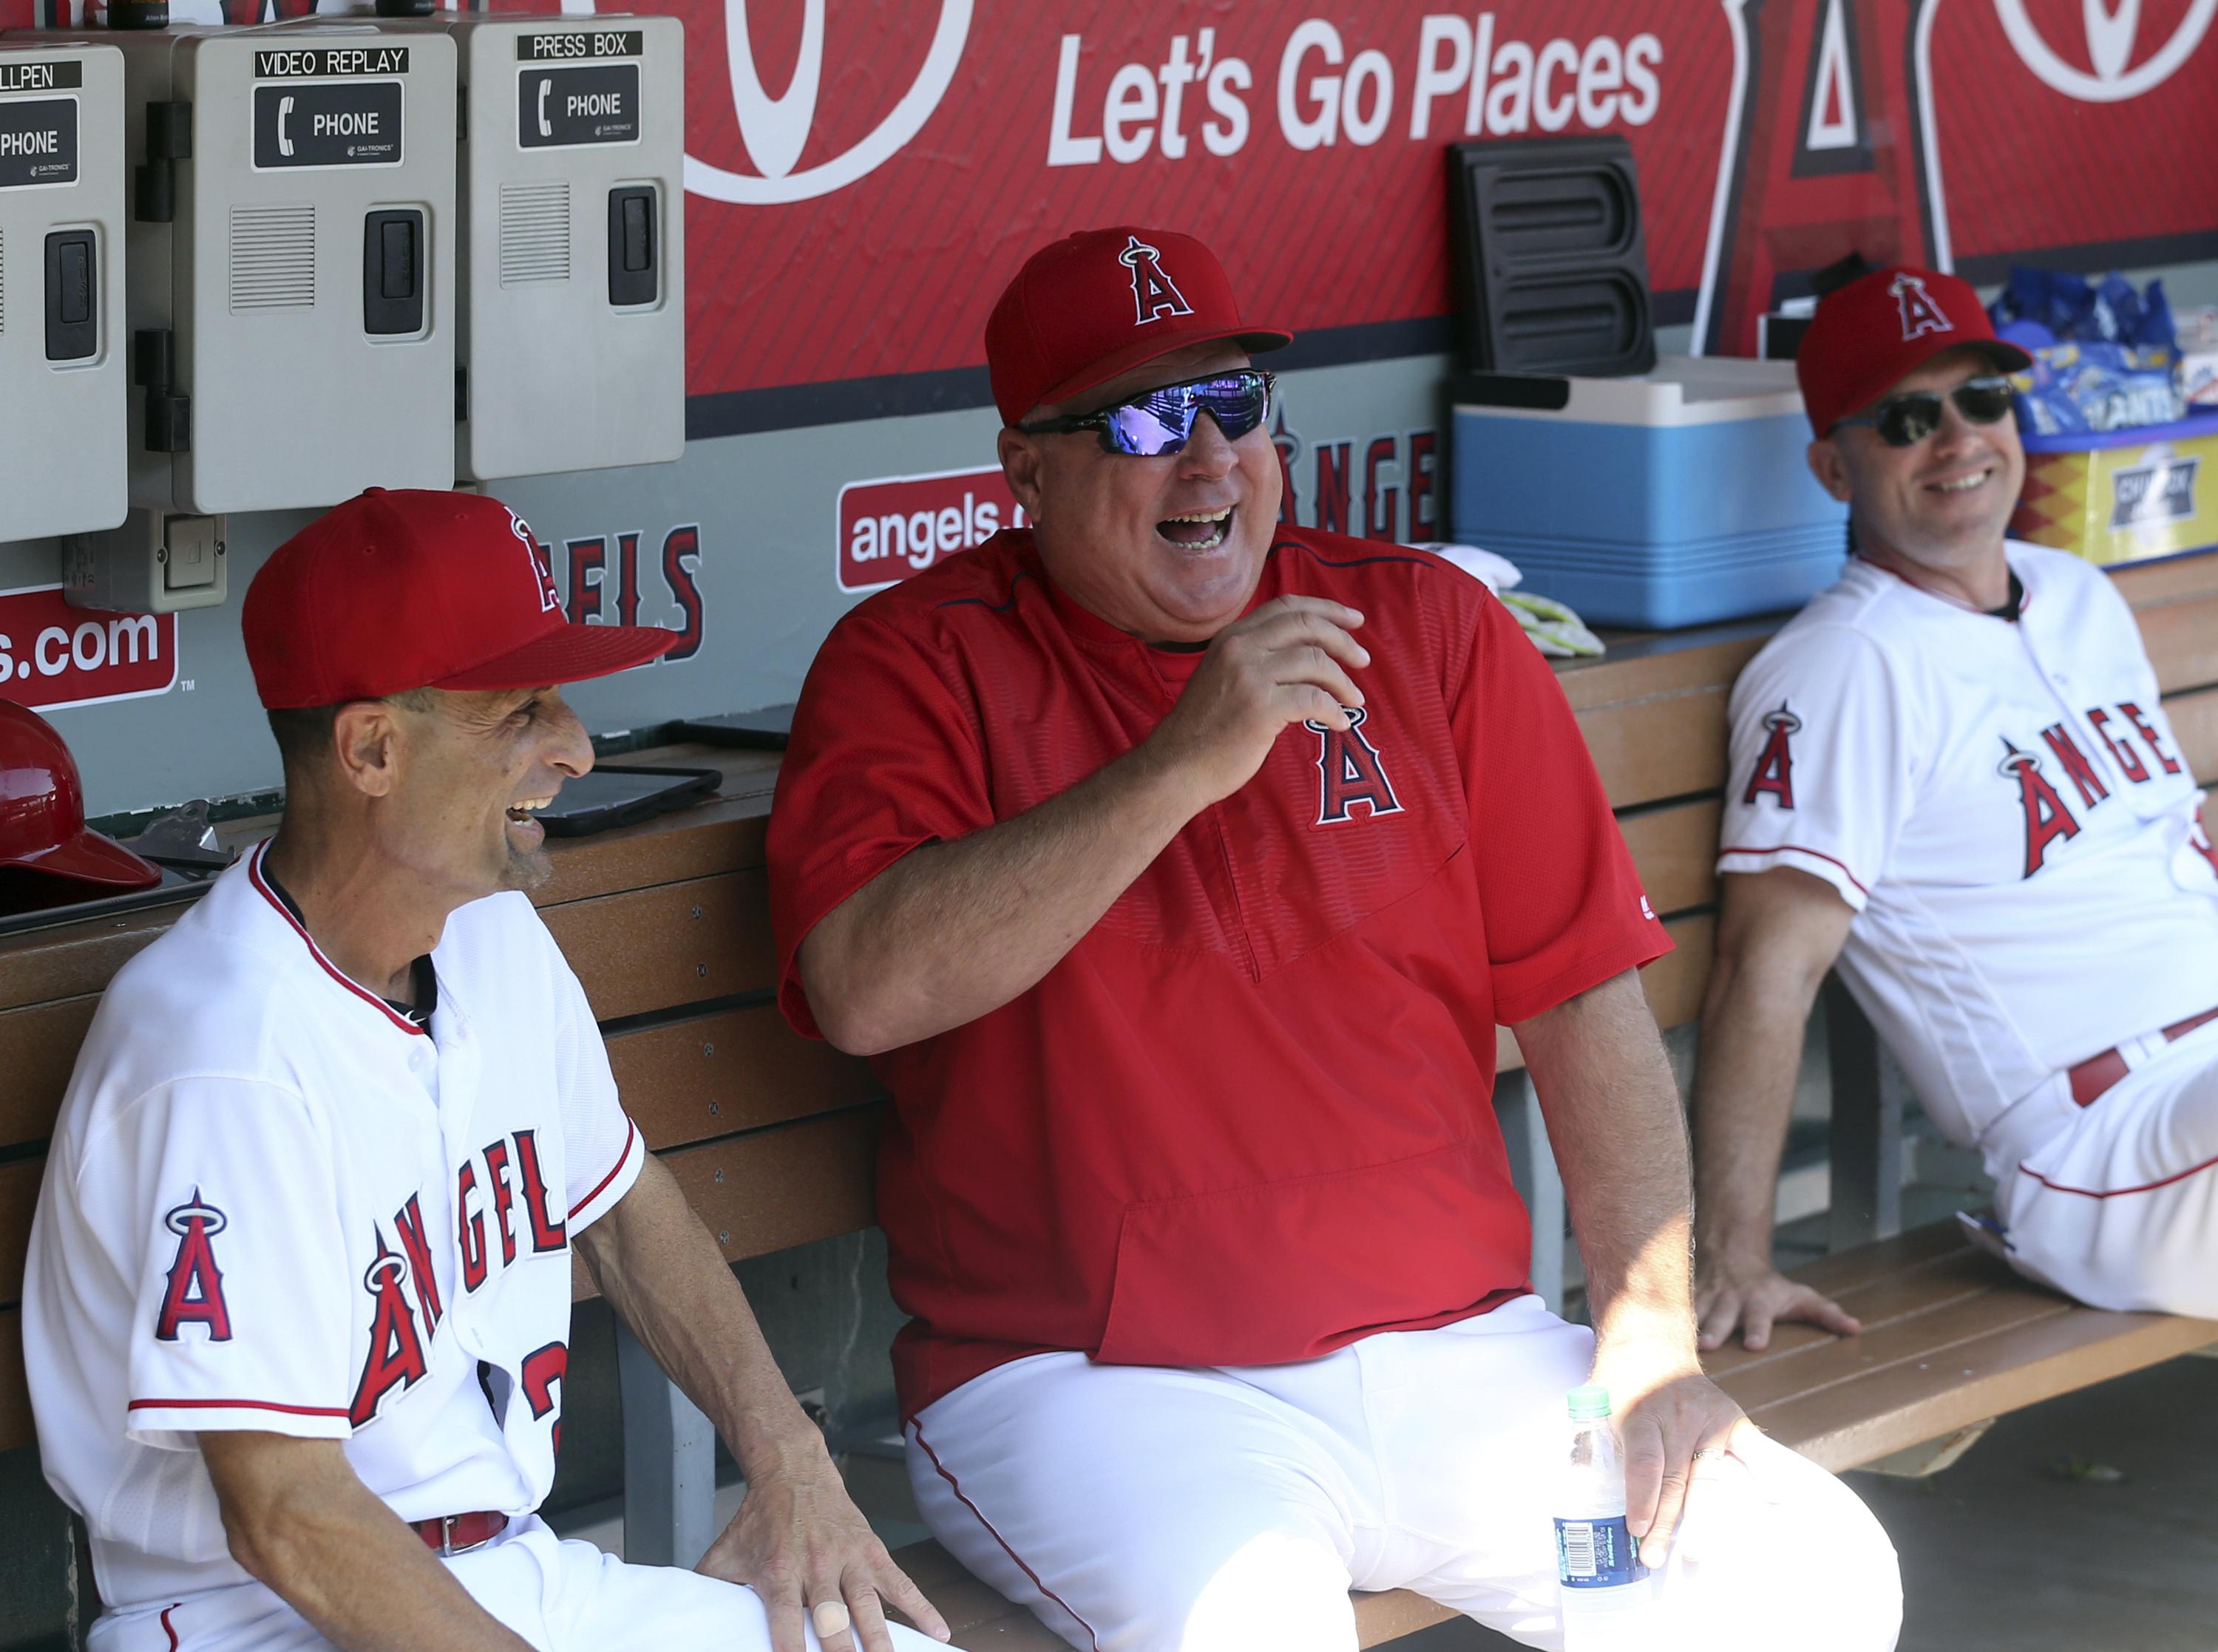 Mike Scioscia steps down as Angels manager after 19 years - Washington Times